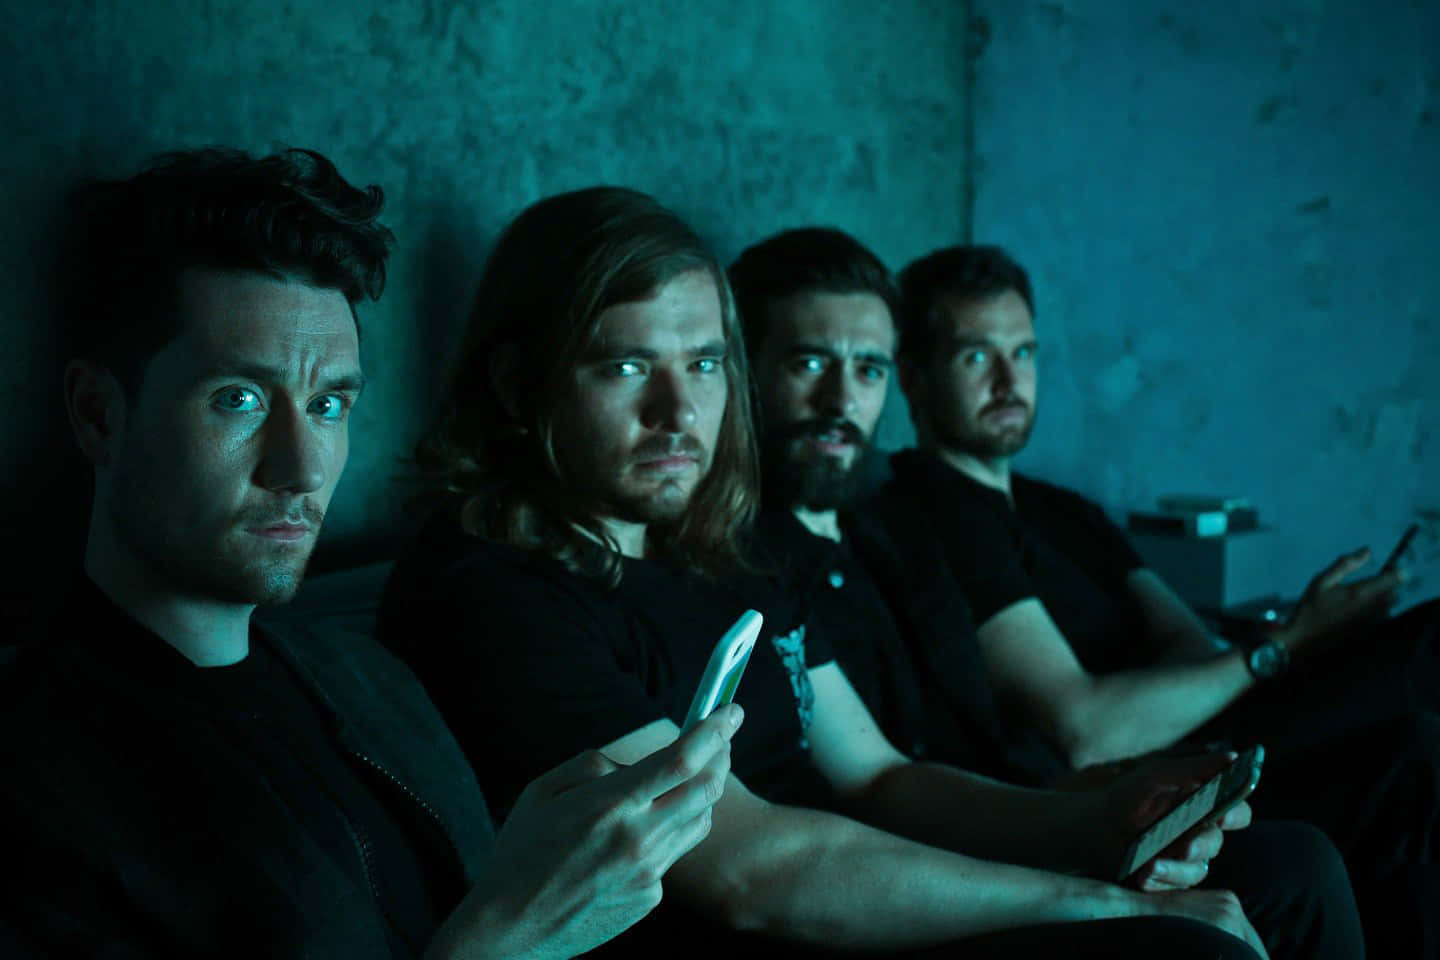 A Group Of Men Sitting In A Dark Room